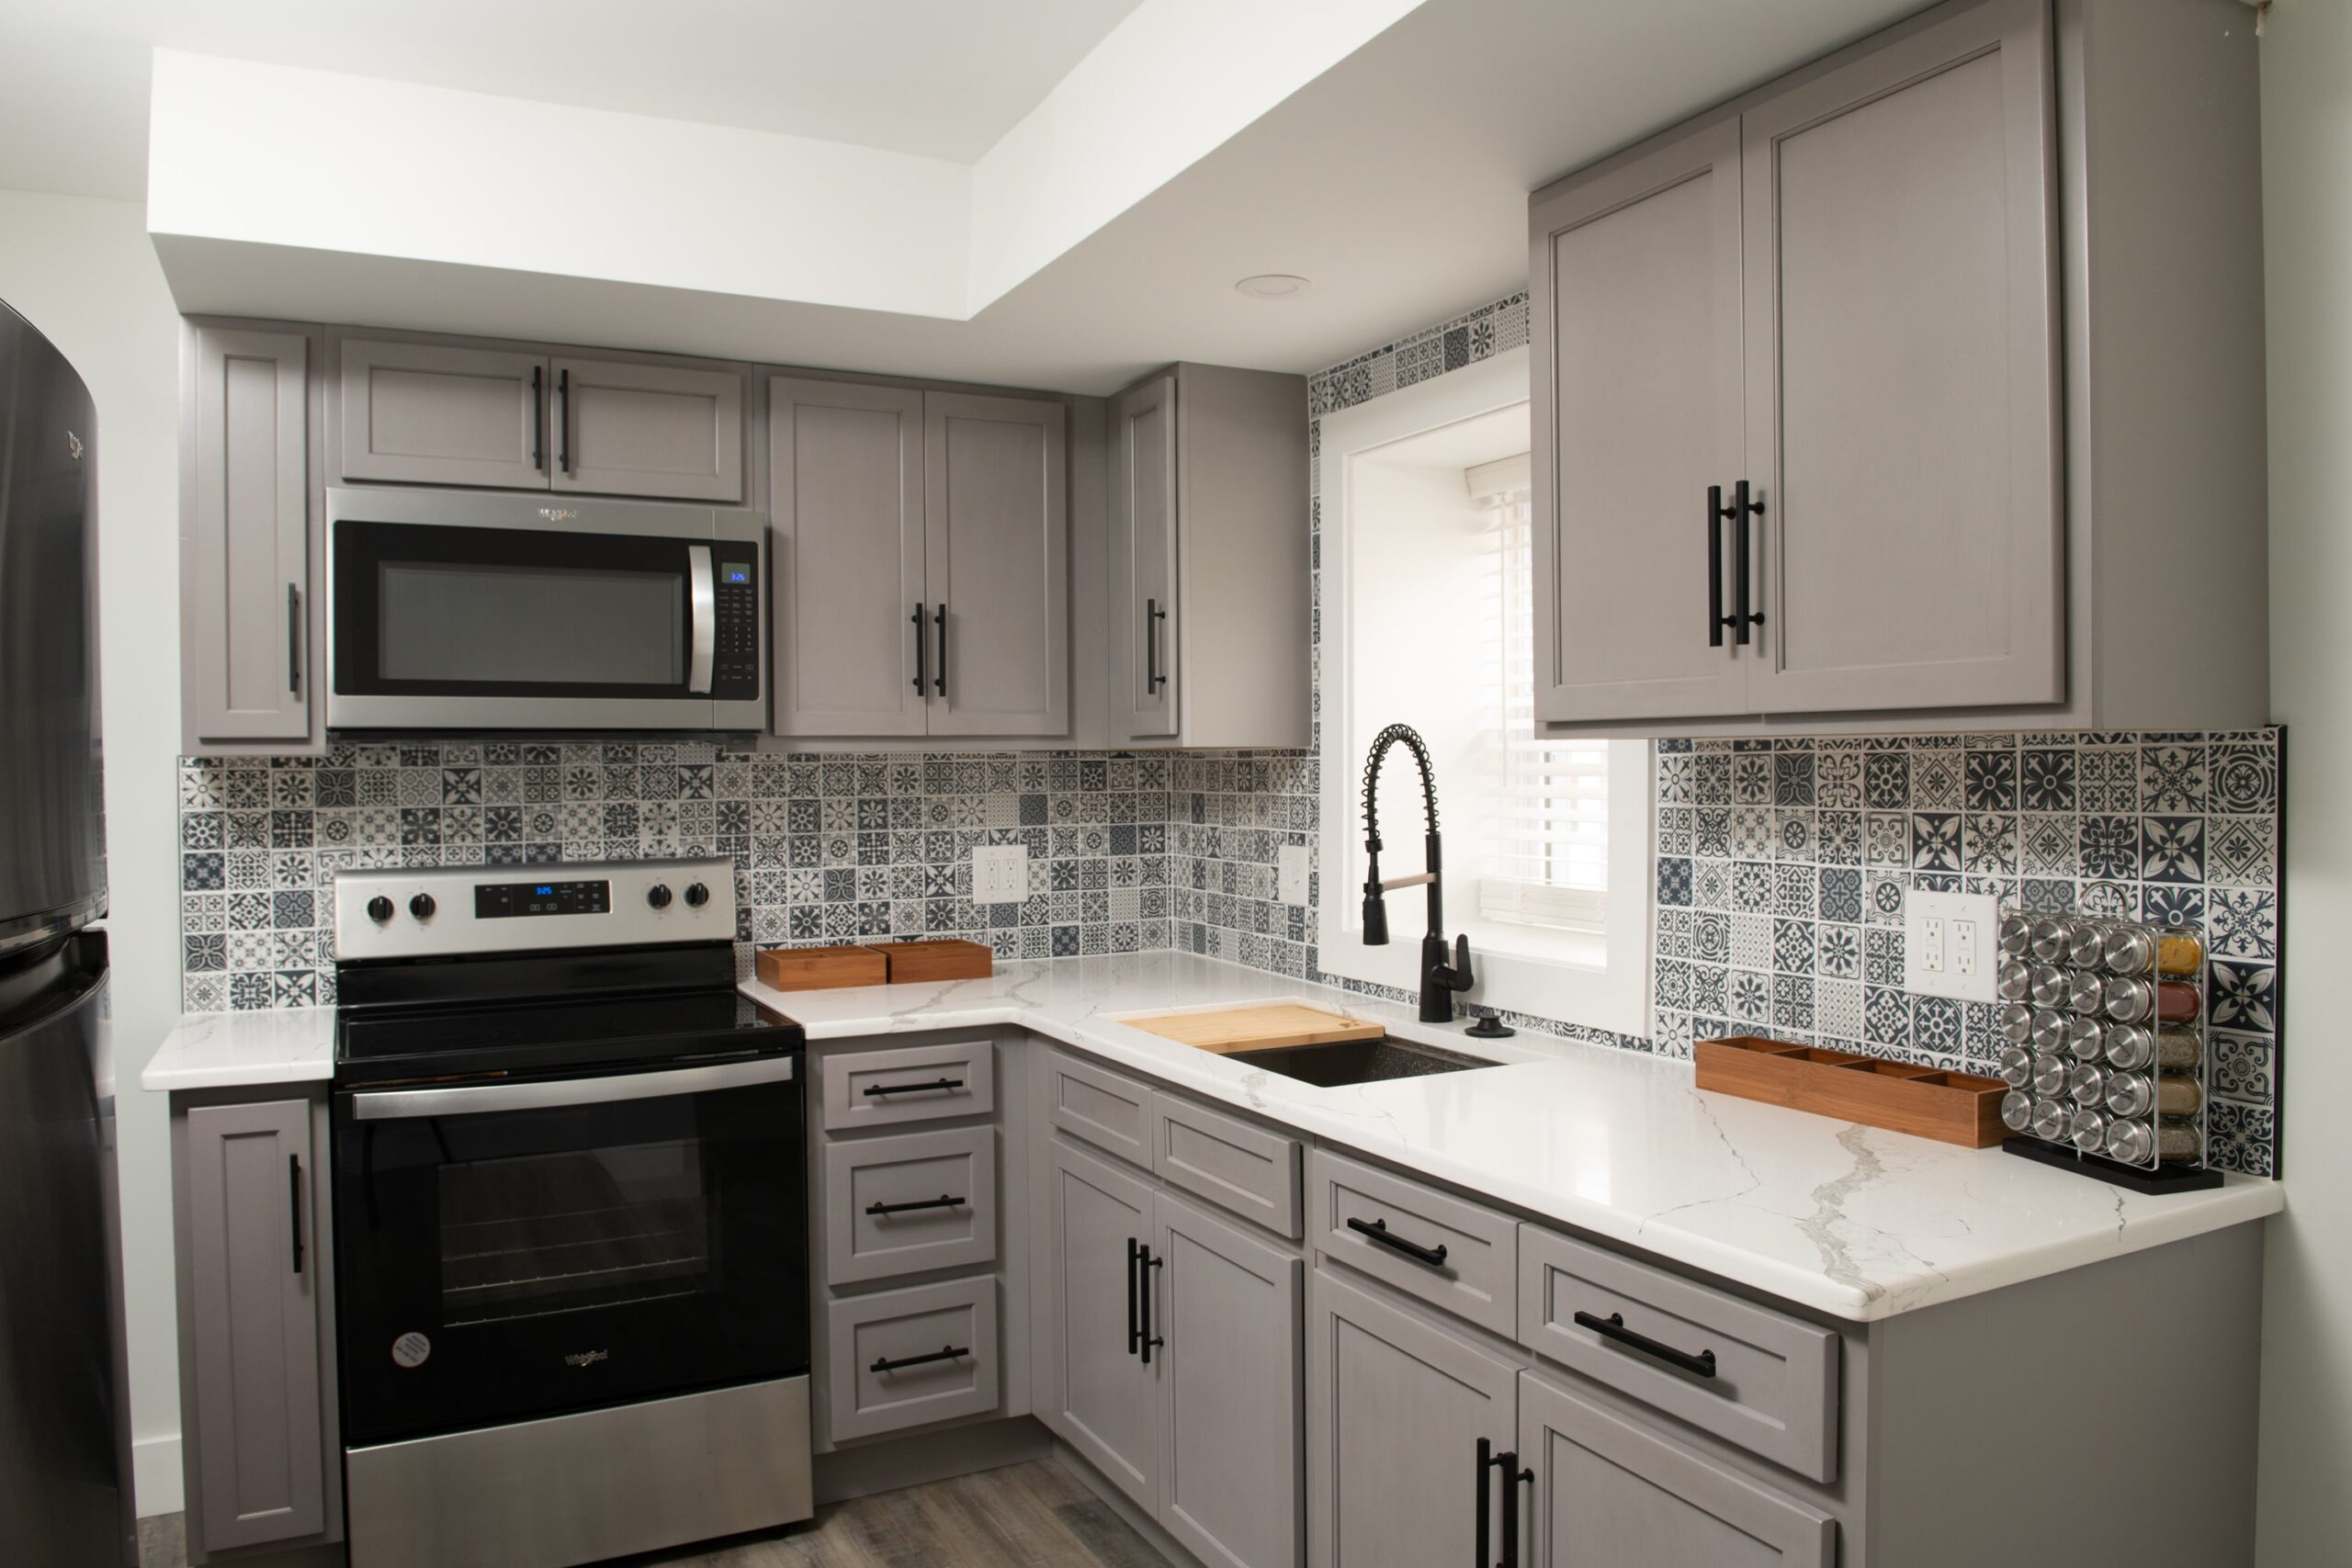 An image of a kitchen with gray cabinets with a gray mosaic backsplash.